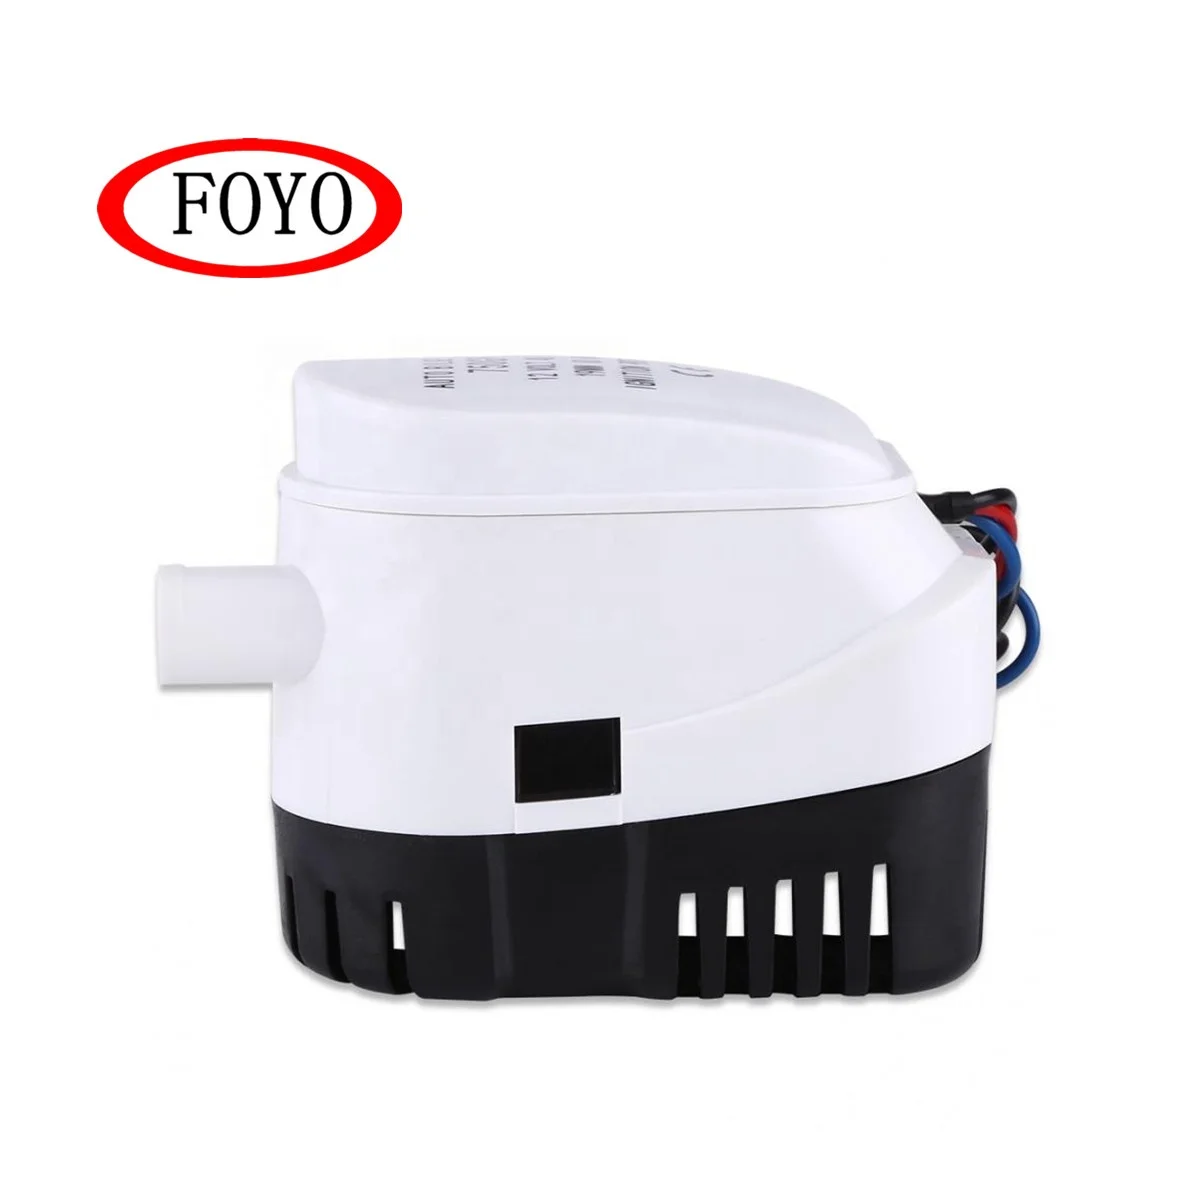 
Foyo Brand Cheap Price Marine 24v 1100GPH Automatic Submersible Boat Bilge Water Pumps for Ponds and Pools and Boat and Yacht  (62511146778)